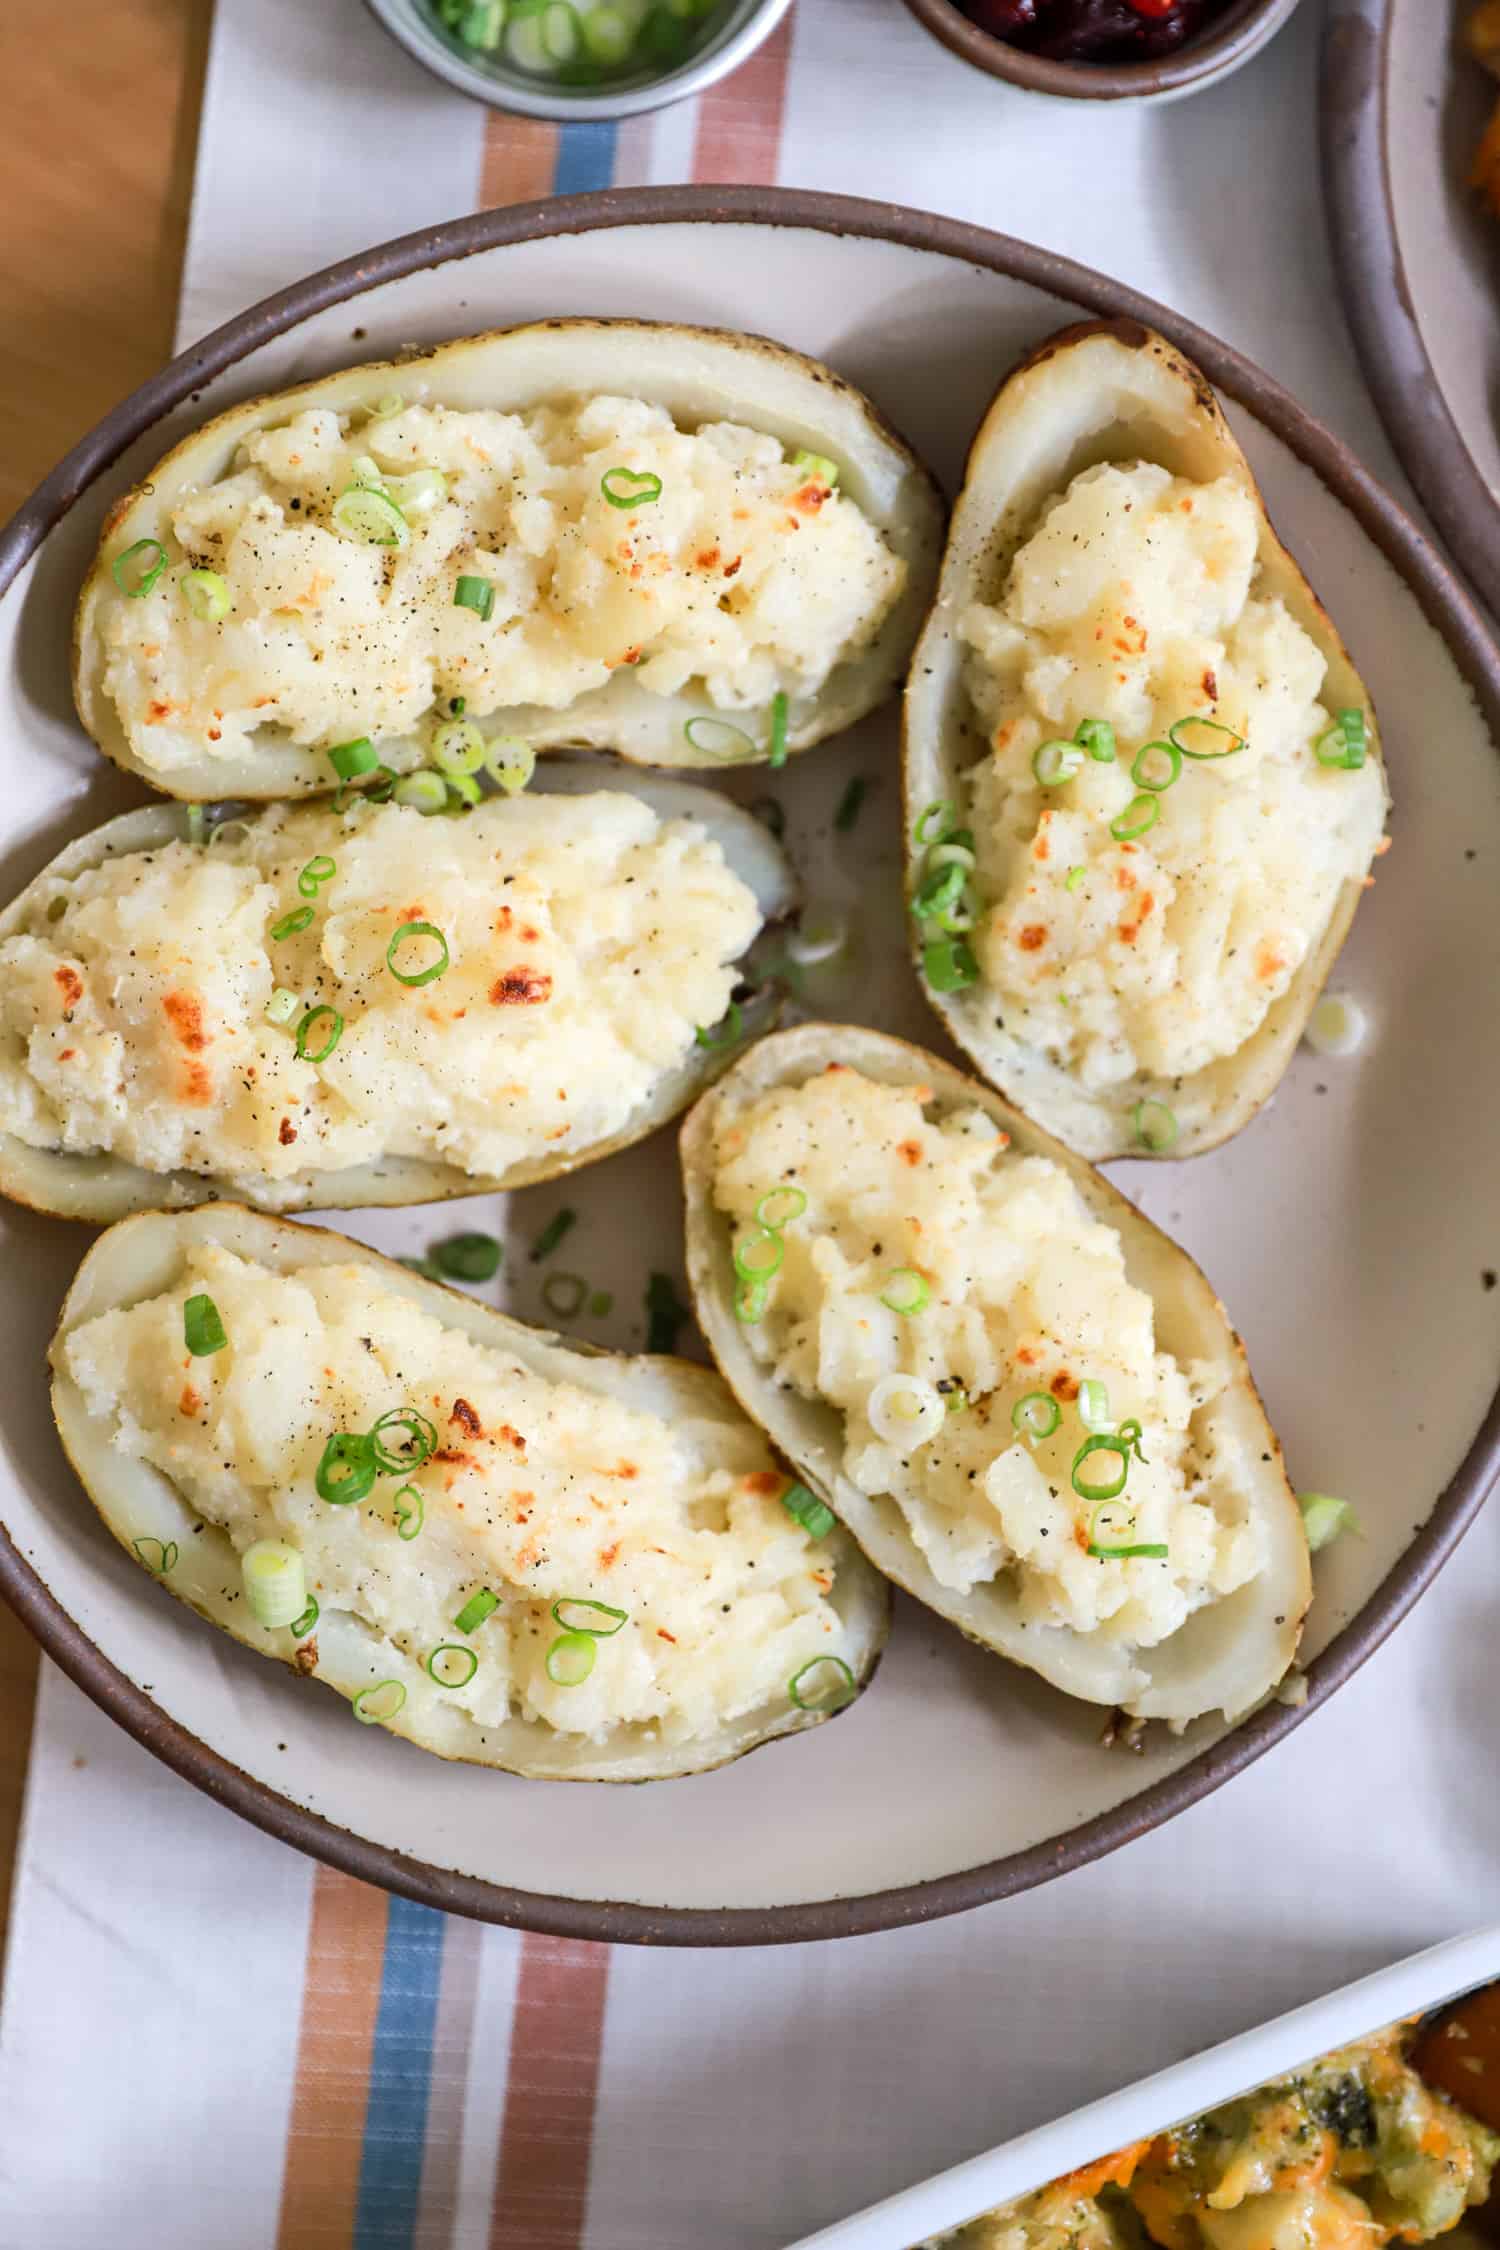 Large serving platter of twice baked potatoes topped with green onions.